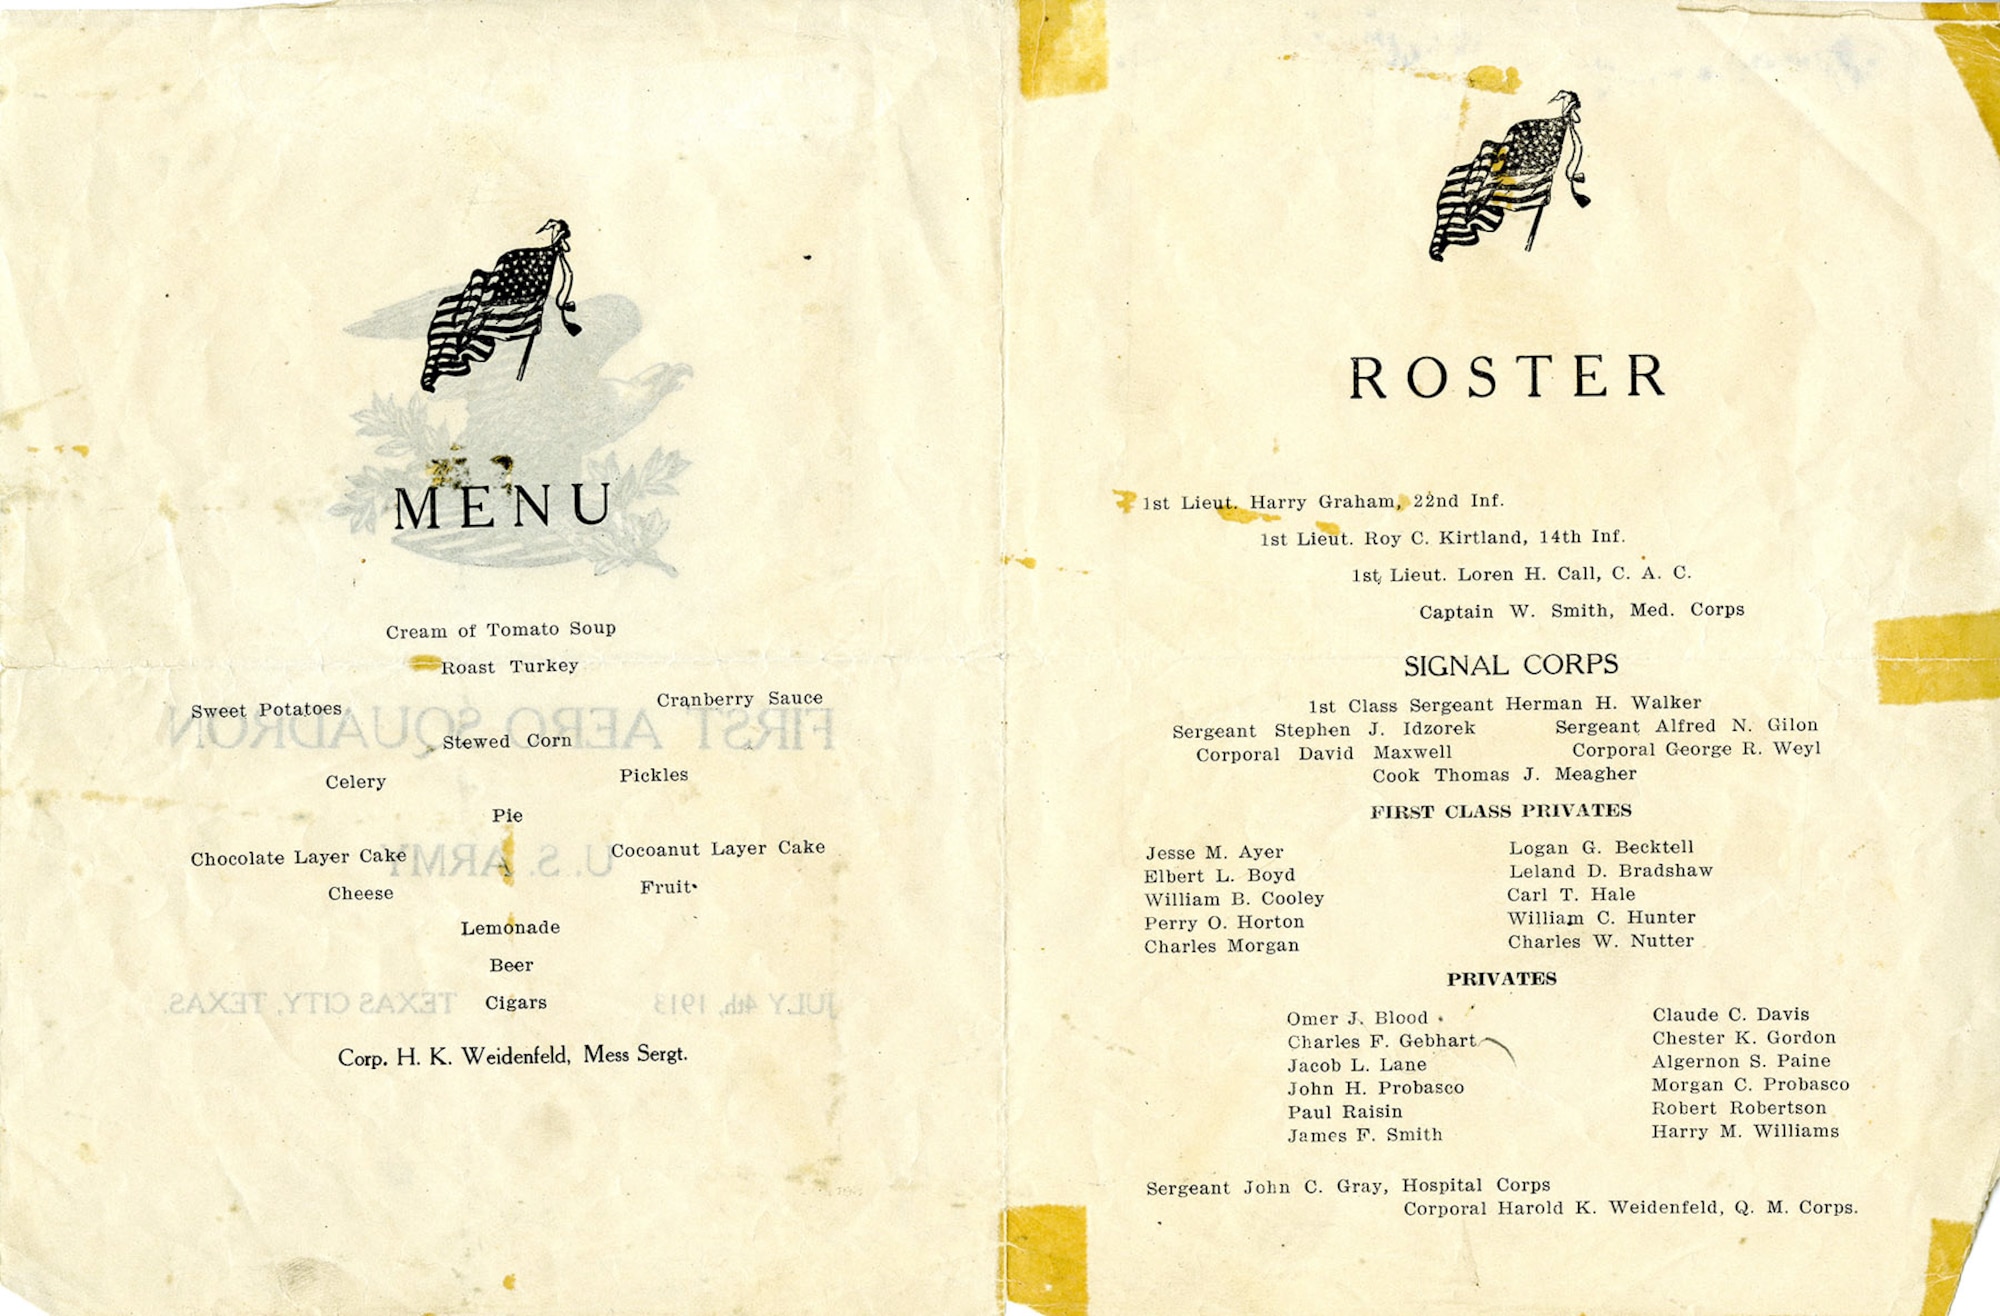 The officers and enlisted men of the 1st Aero Squadron stationed at Texas City, Texas, celebrated the Fourth of July with a special meal. The menu also lists a roster of all the personnel assigned to the United States first operational flying squadron in 1913. (U.S. Air Force photo)